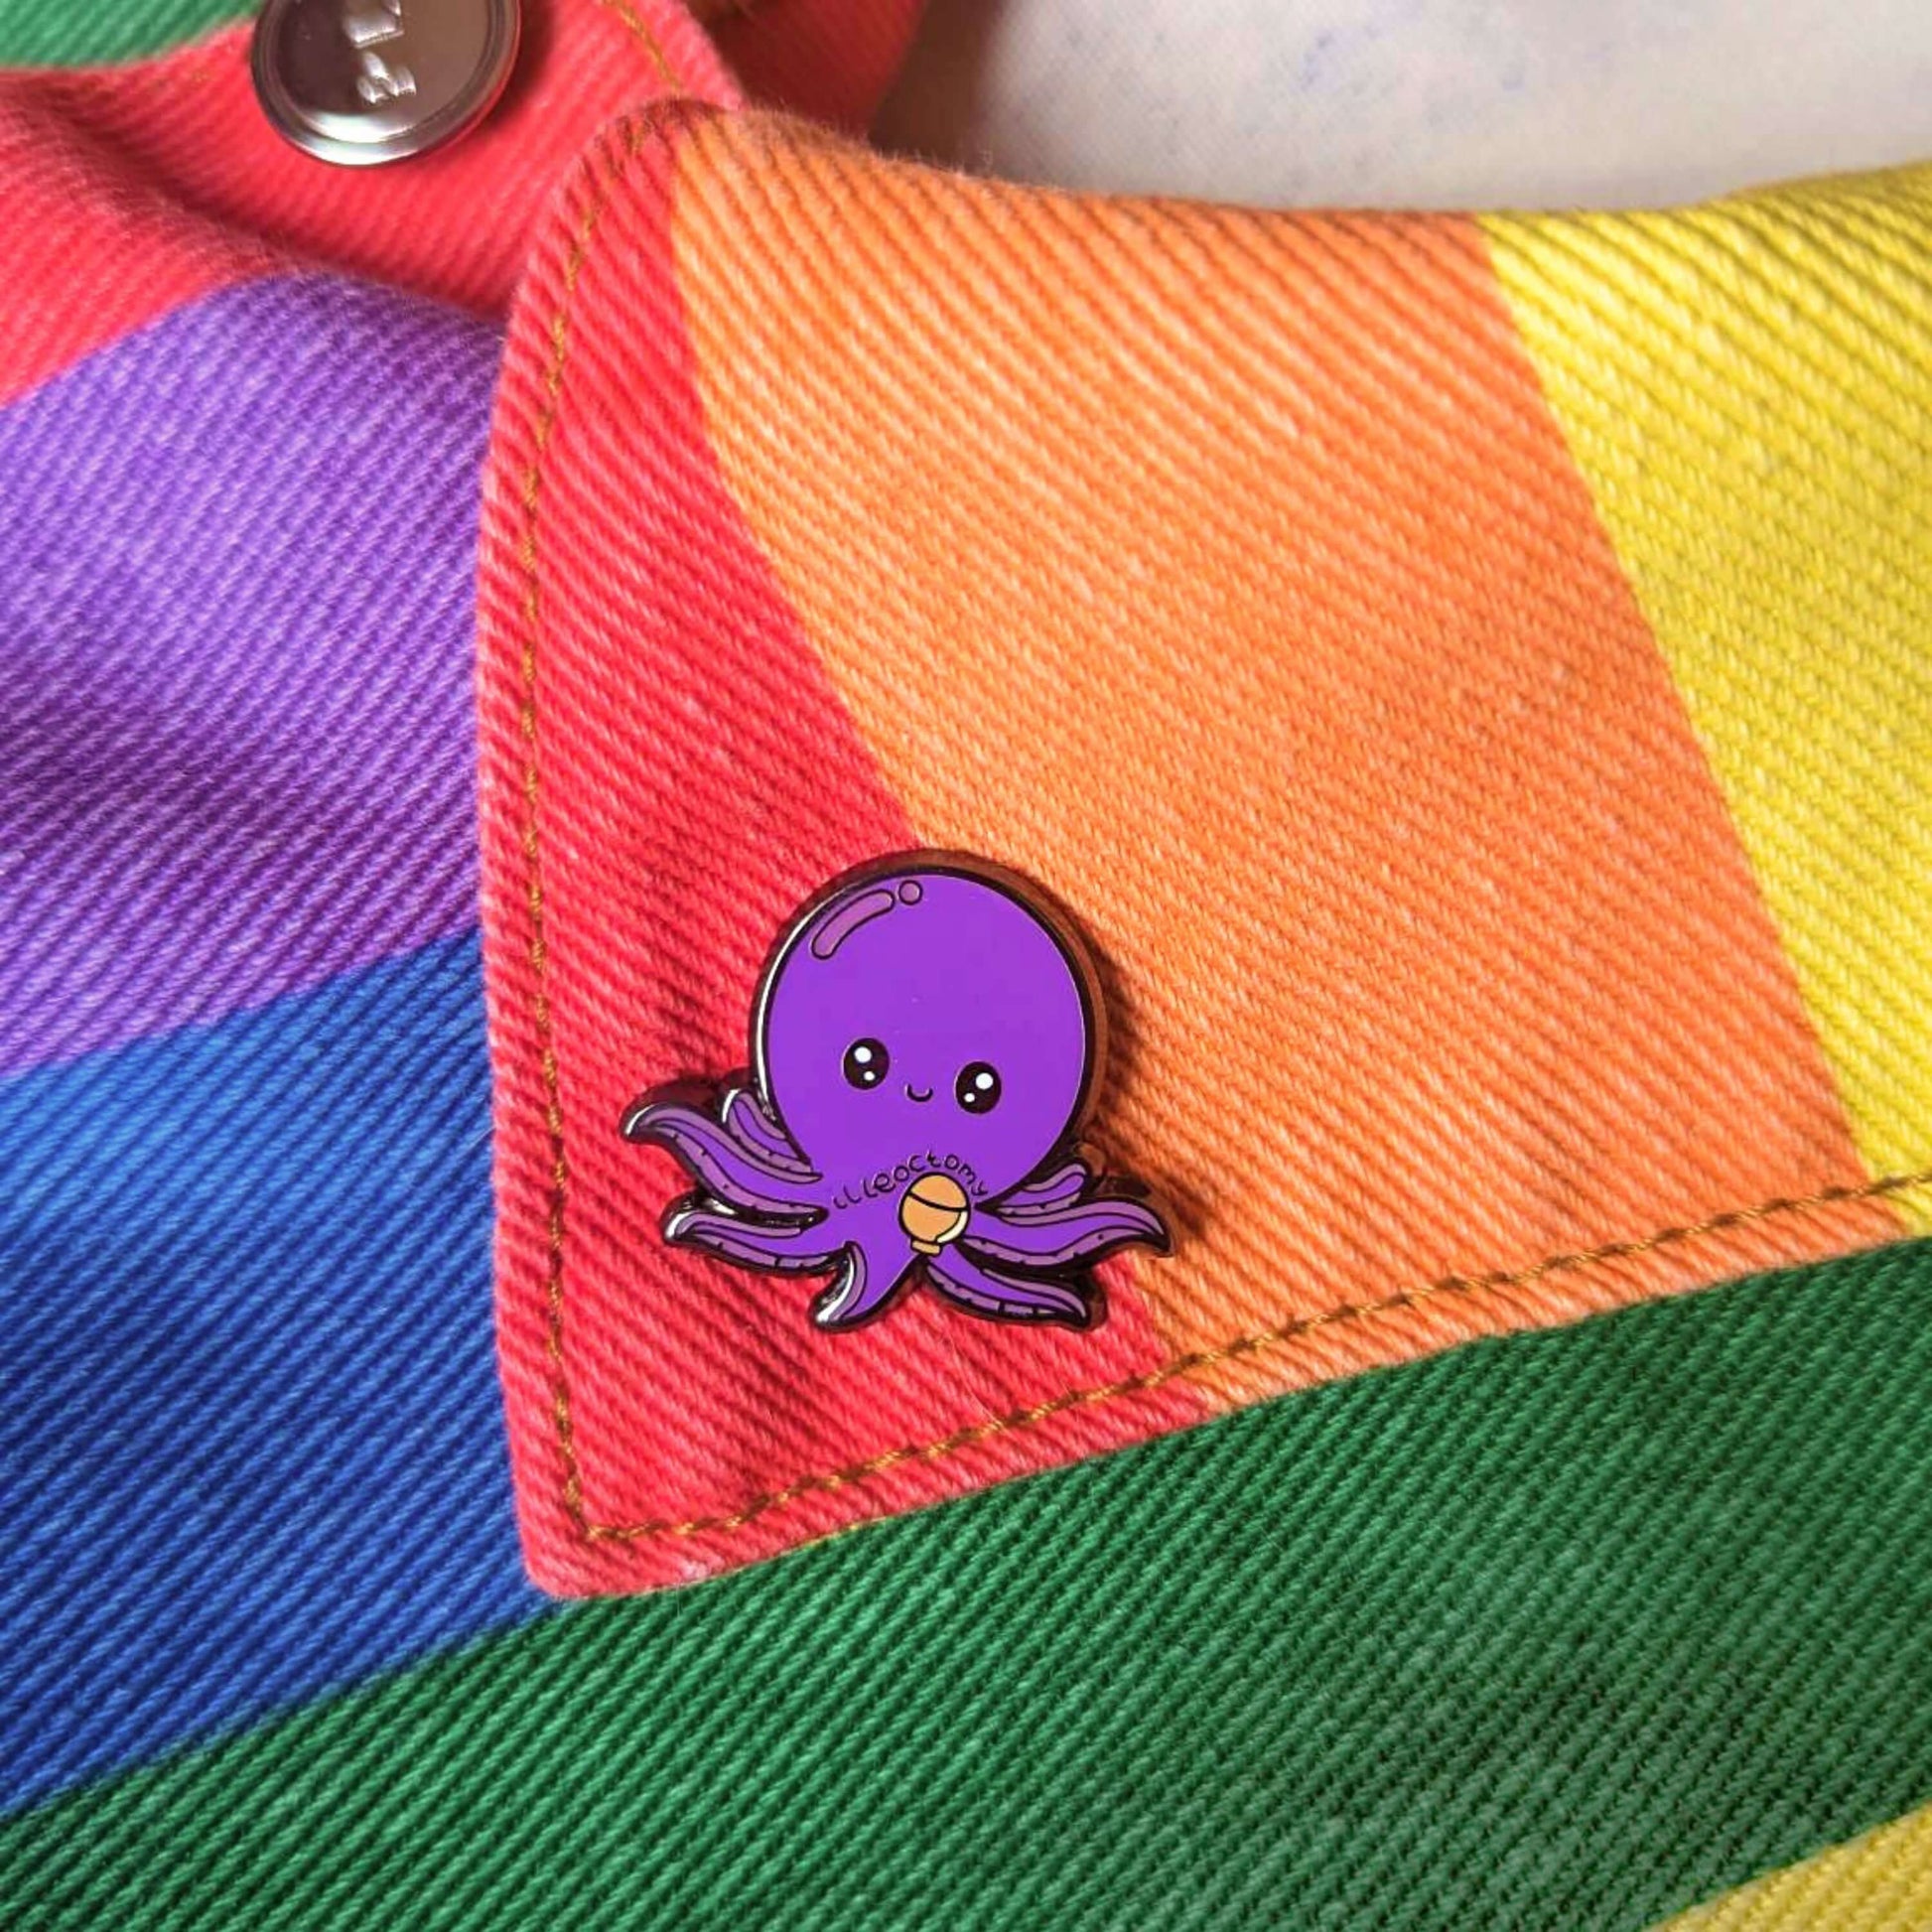 Ileoctomy Enamel Pin - Ileostomy shown pinned to a rainbow jacket. The enamel pin is a cute smiling purple octopus sticker with text saying ileoctomy on its belly with a stoma bag underneath. Enamel pin designed to raise awareness for Ileostomy